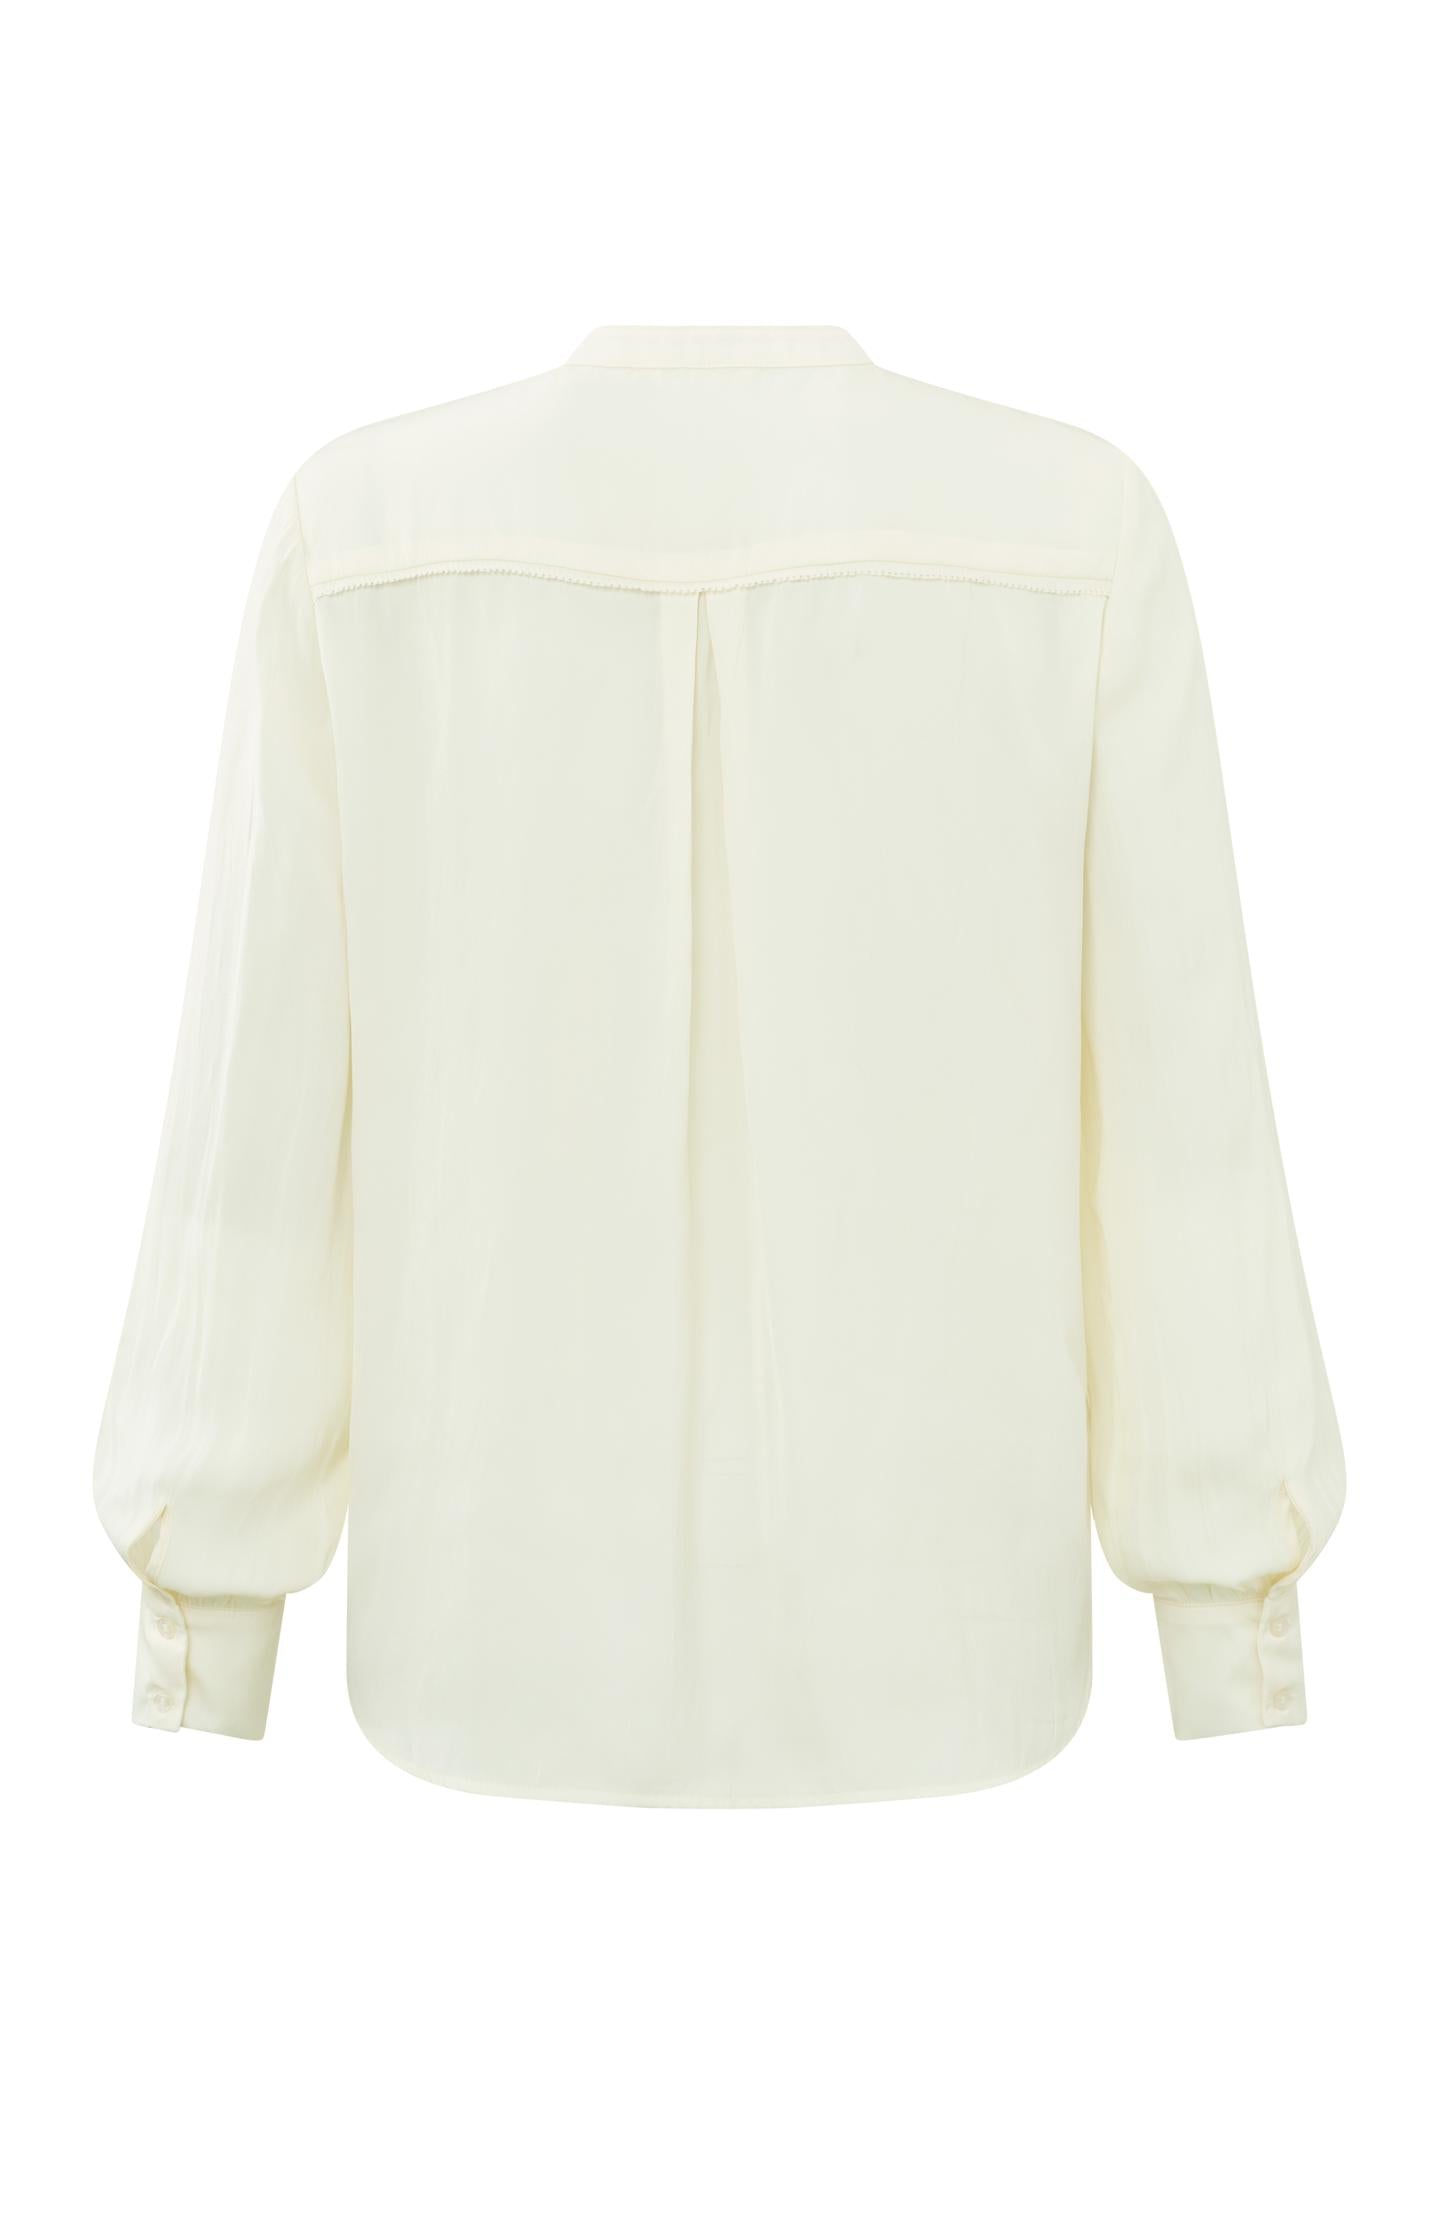 Blouse with round neck, balloon sleeves and scallop edge - Ivory White